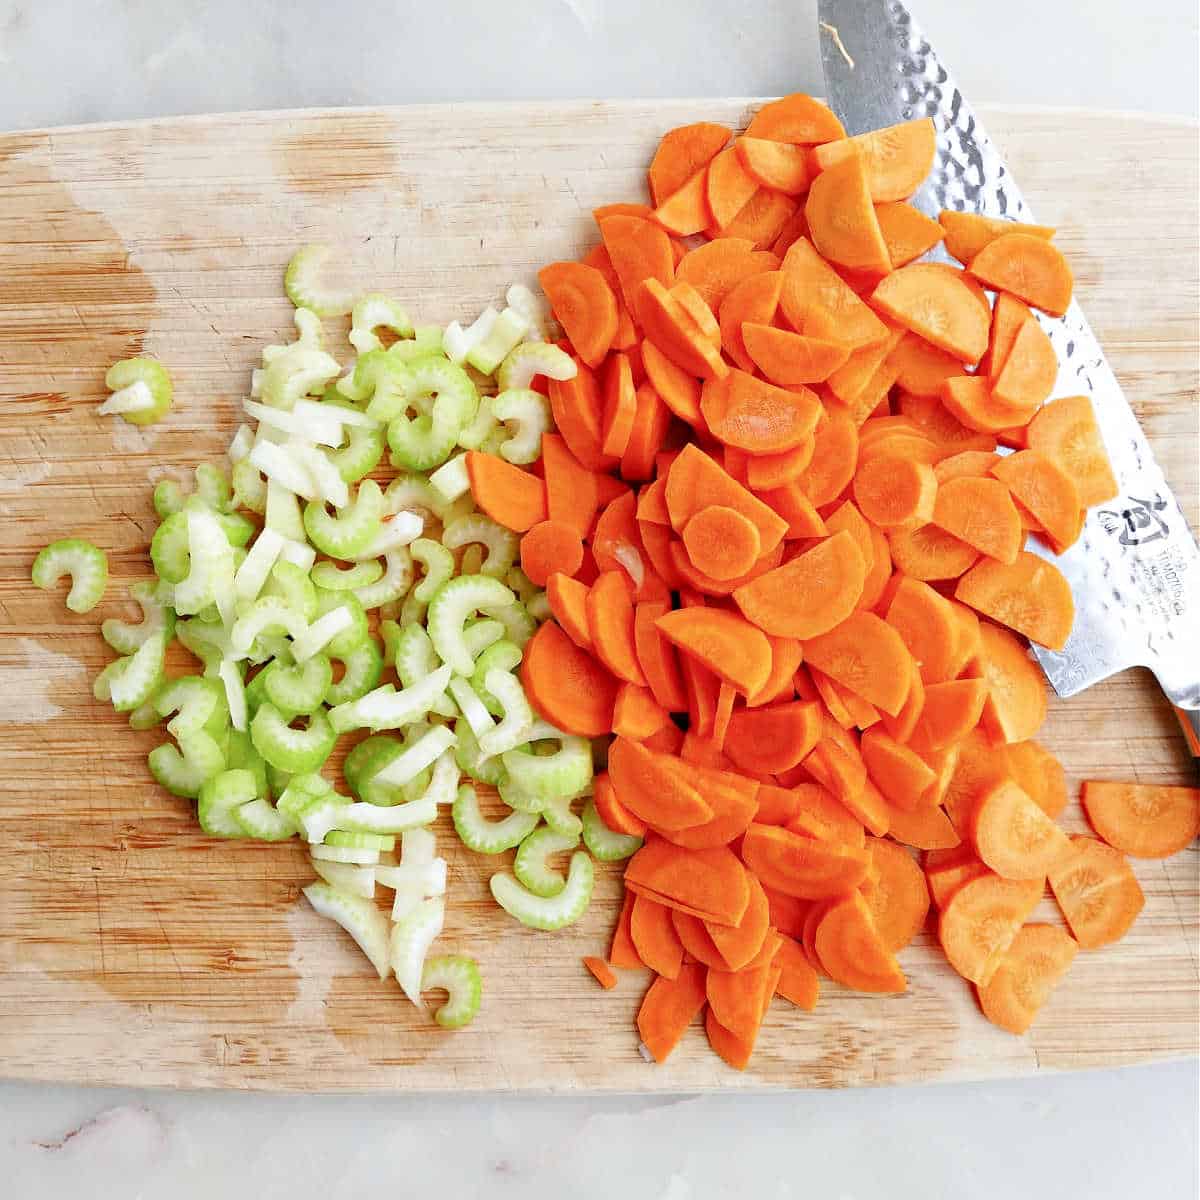 sliced celery and carrots on a cutting board with a chef's knife